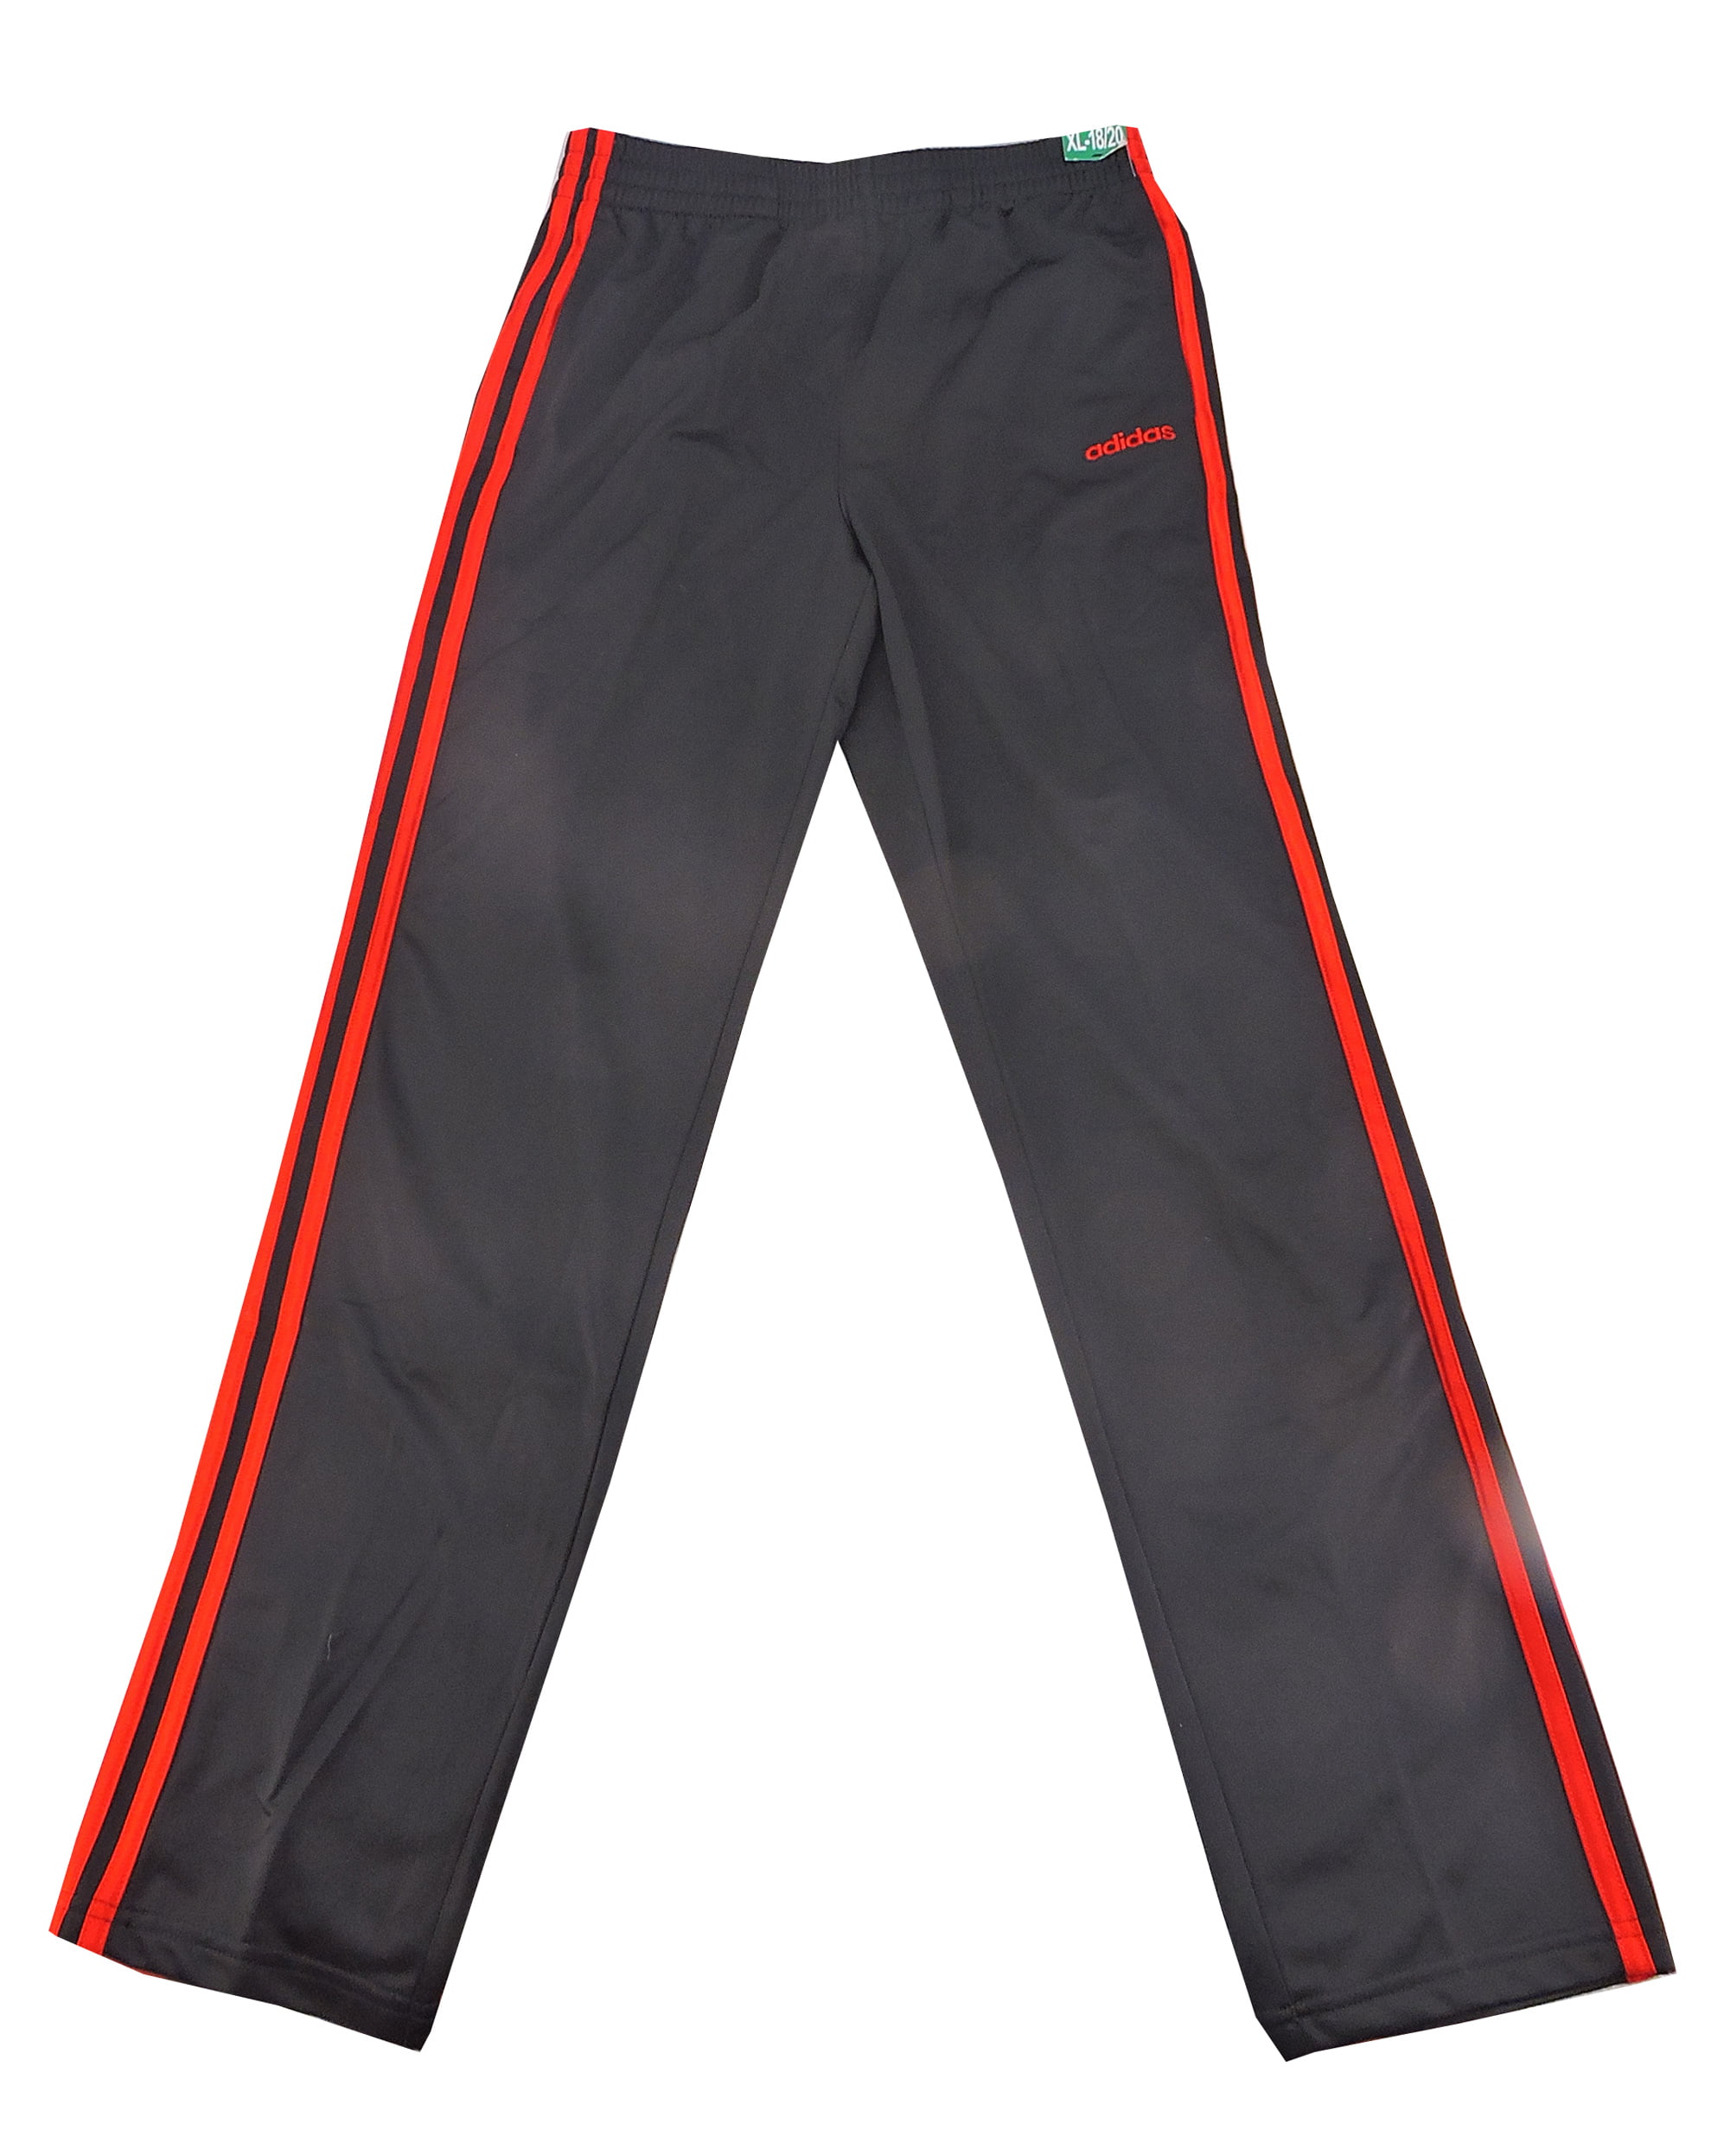 Adidas - Adidas Youth Boys' Jogger Mesh Pants in Black/Red Size 18/20 ...